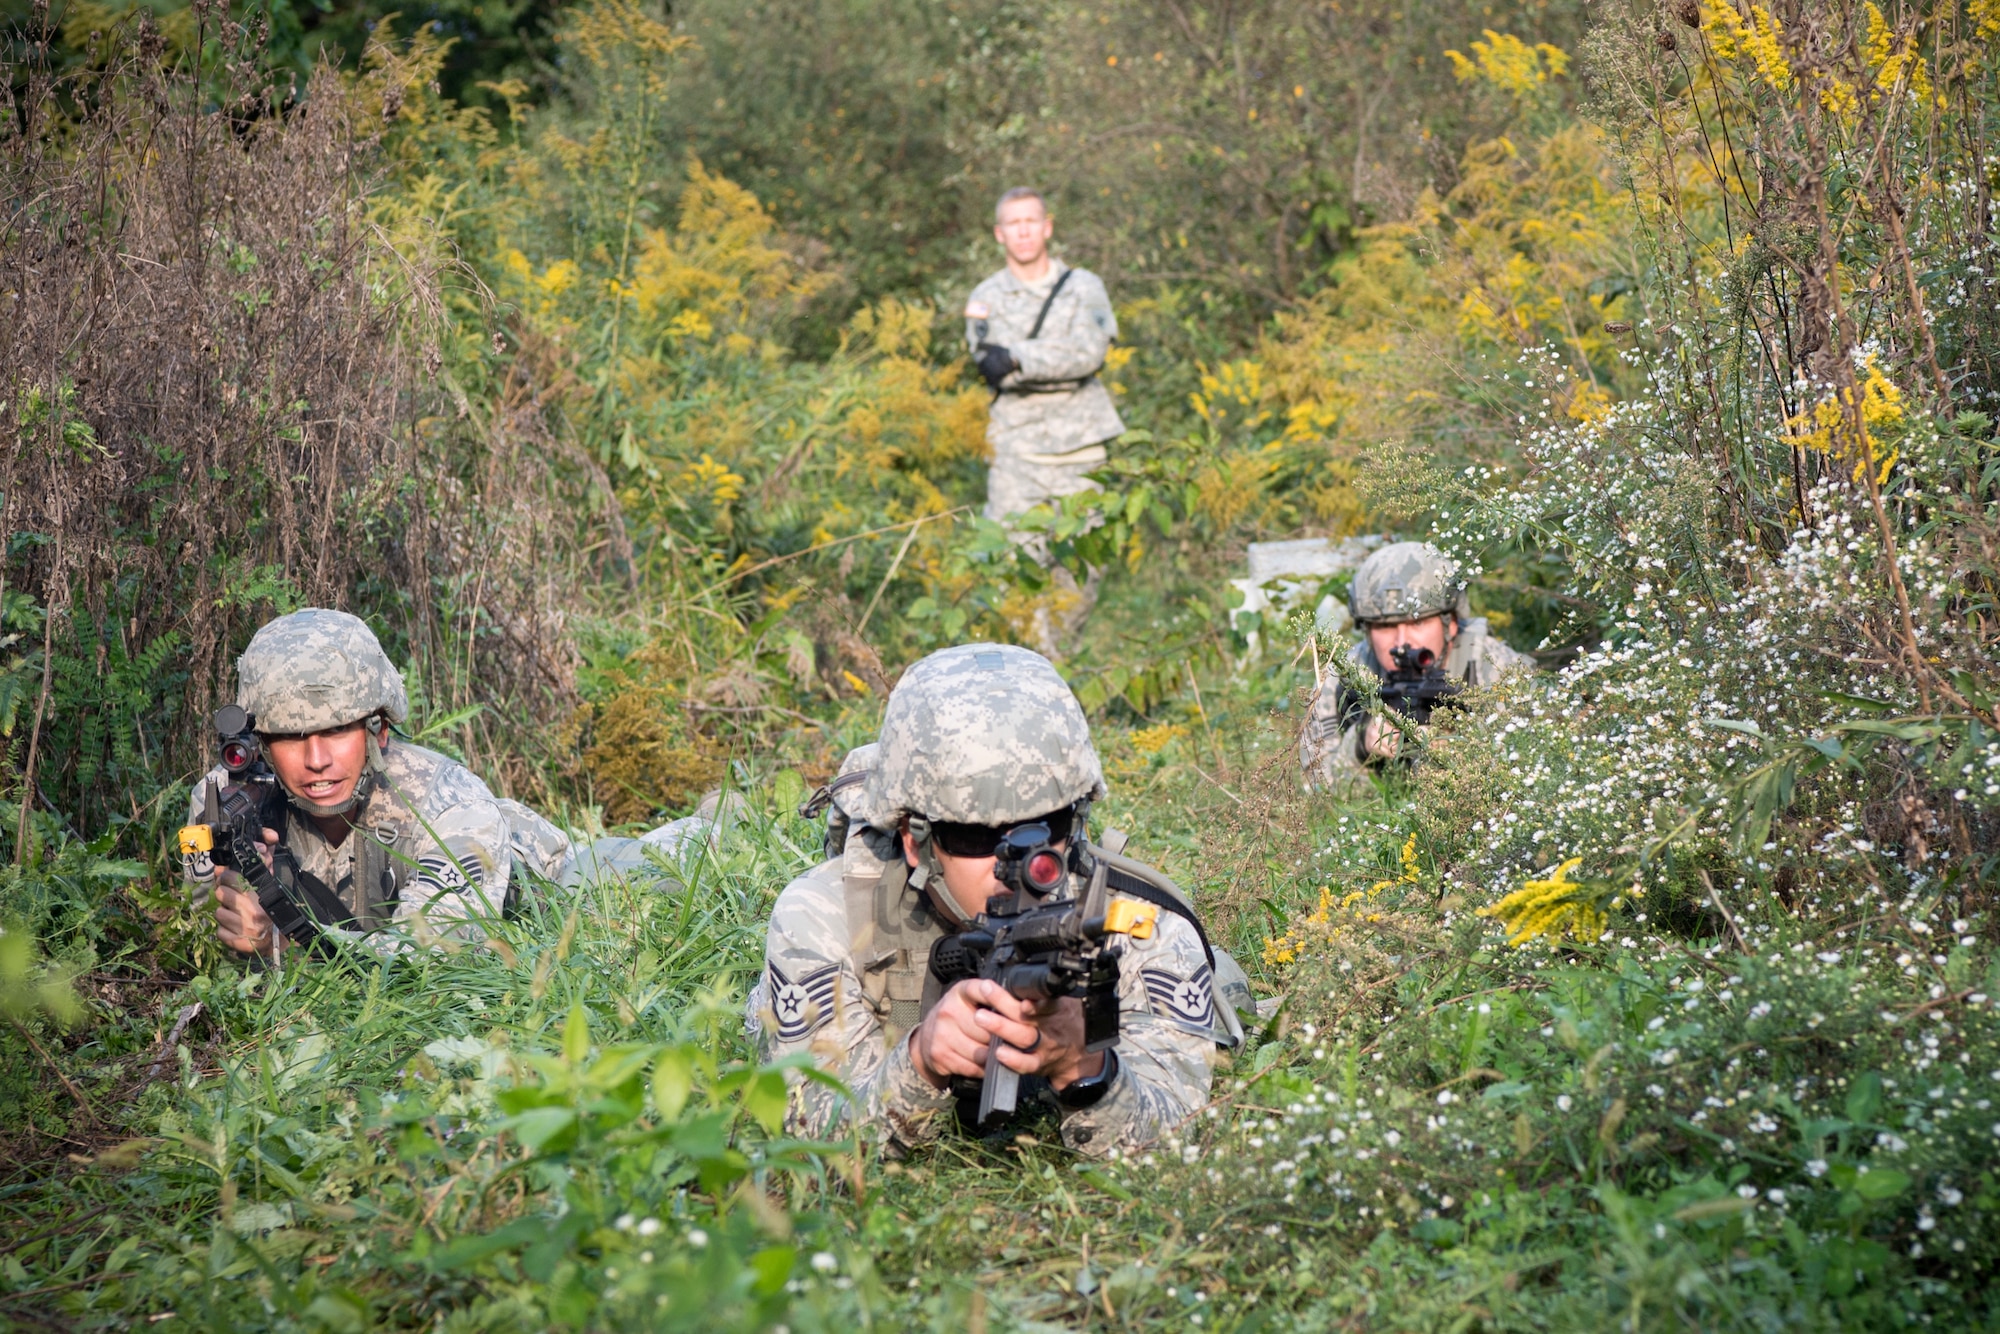 From the left, Staff Sgt. Adam Childers, Tech. Sgt. Christopher Barrett, and Staff Sgt. Bo Hall, all 434th Security Forces Squadron fire team members, react to contact while U. S. Army Staff Sgt. David Christopher, 316th Psychological Operations Company PSYOP specialist, scores their performance, during an Army Warrior Tasks competition at Grissom Air Reserve Base, Indiana, Sept. 21, 2018. Childers, Barett and Hall were one of twelve 3-man teams and the only Air Force team to participate in the competition developed to test combat skills. (U.S. Air Force photo by Tech. Sgt. Ben Mota)